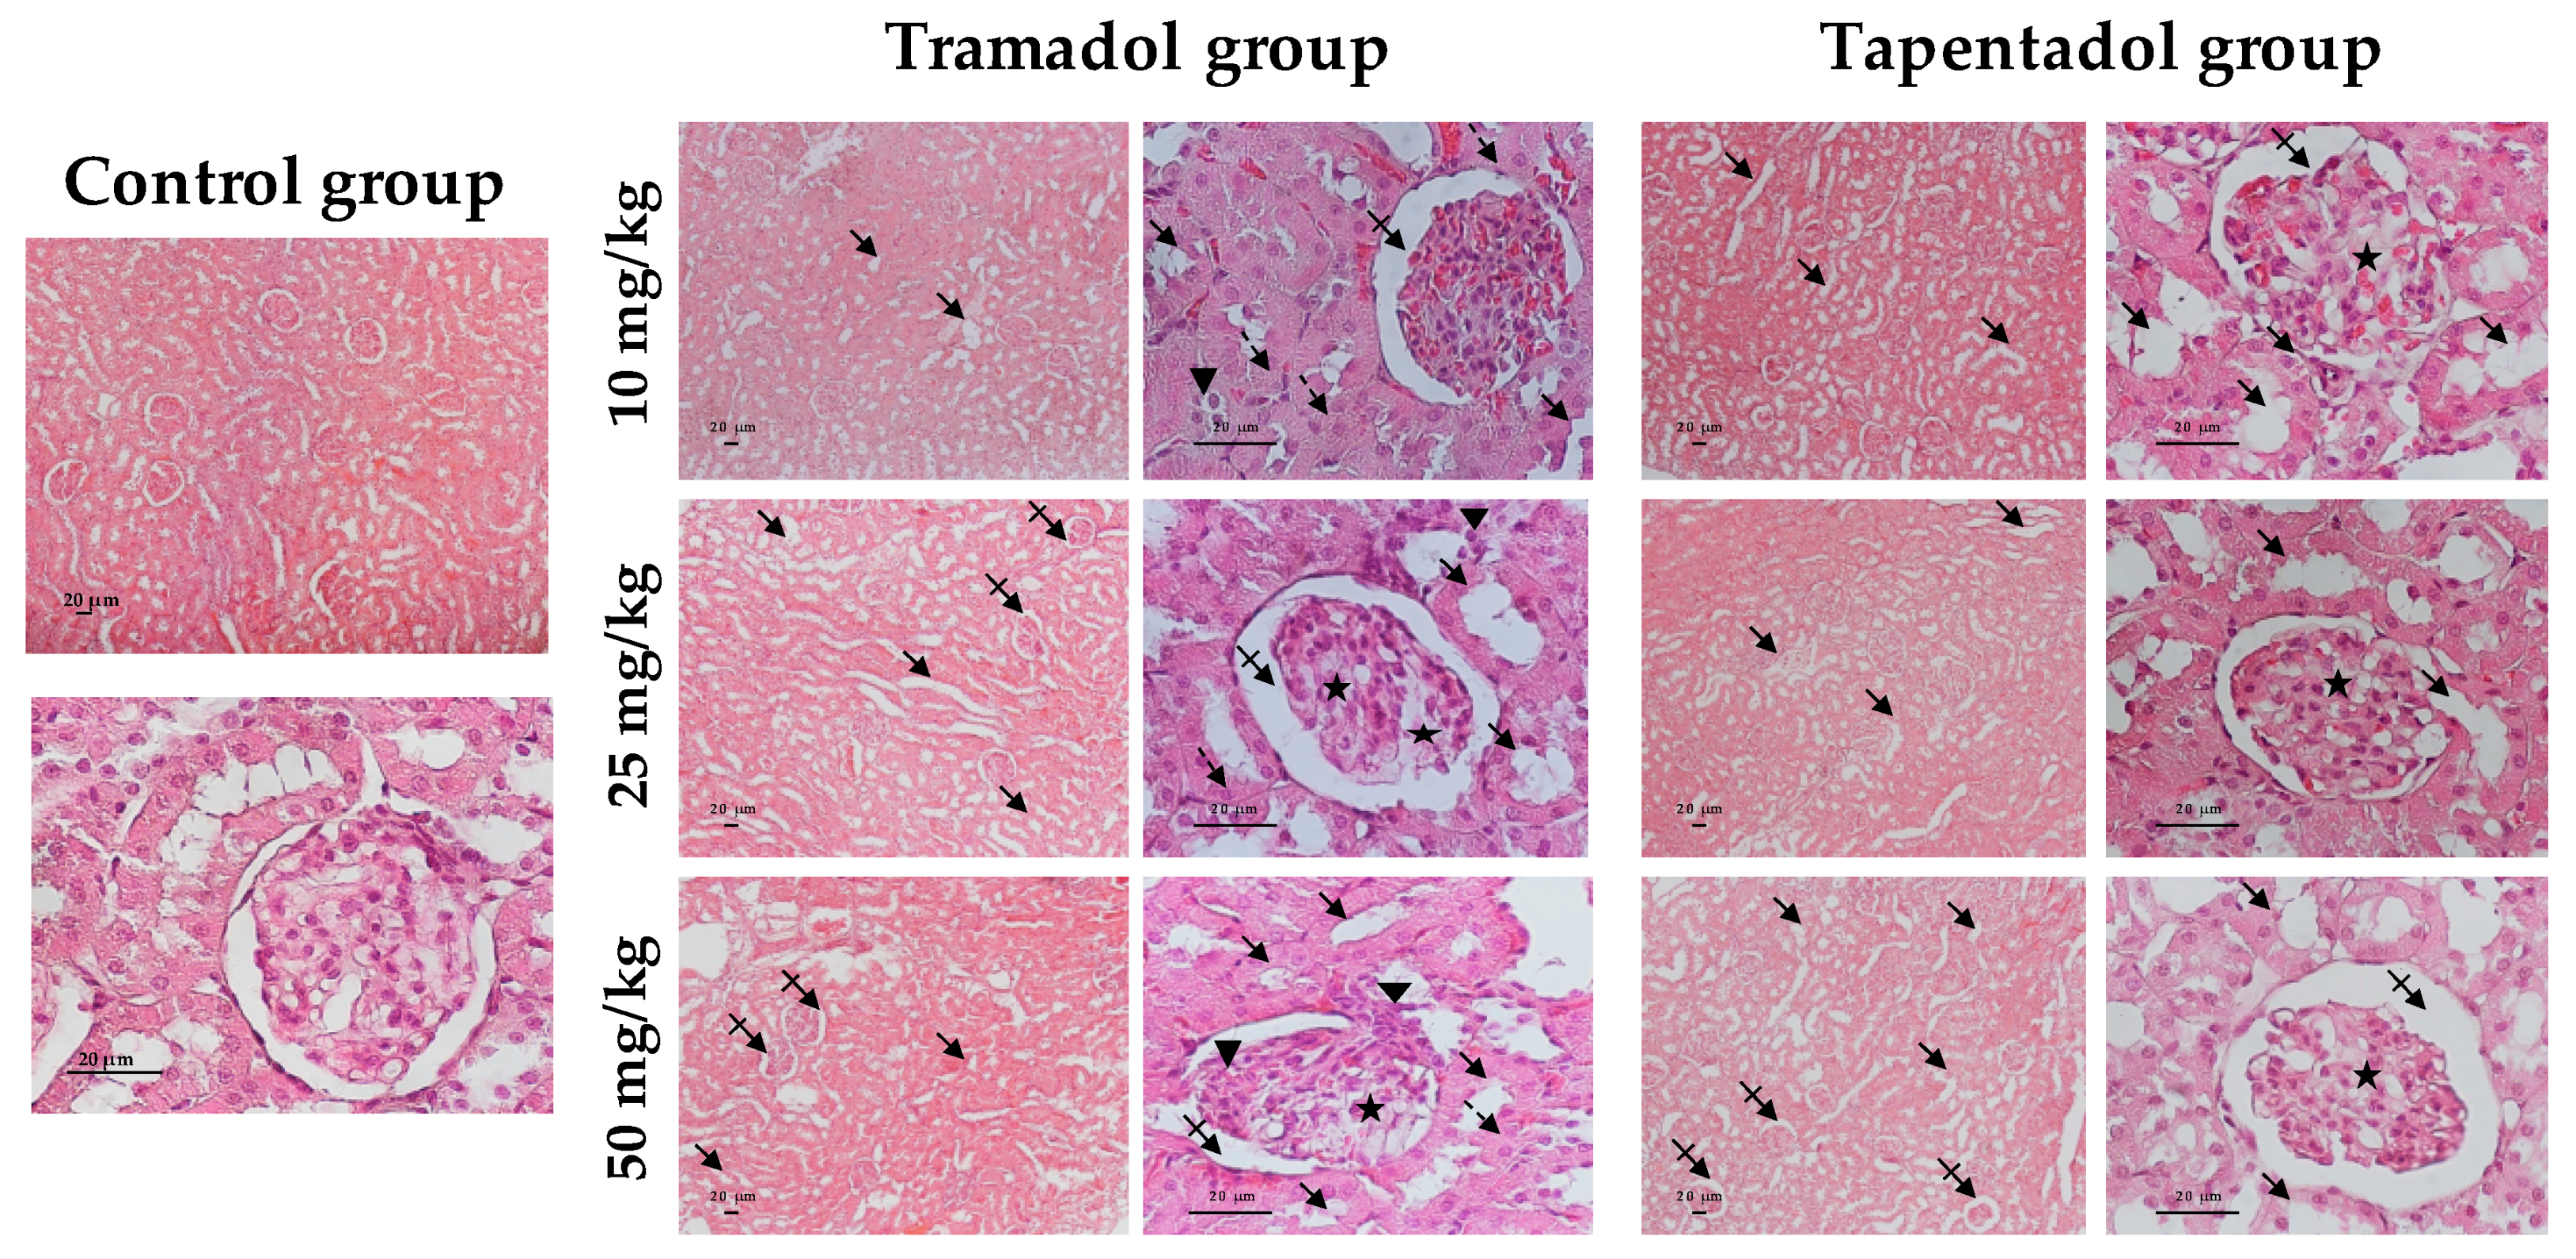 Pharmaceuticals Free Full Text Repeated Administration Of Clinical Doses Of Tramadol And Tapentadol Causes Hepato And Nephrotoxic Effects In Wistar Rats Html